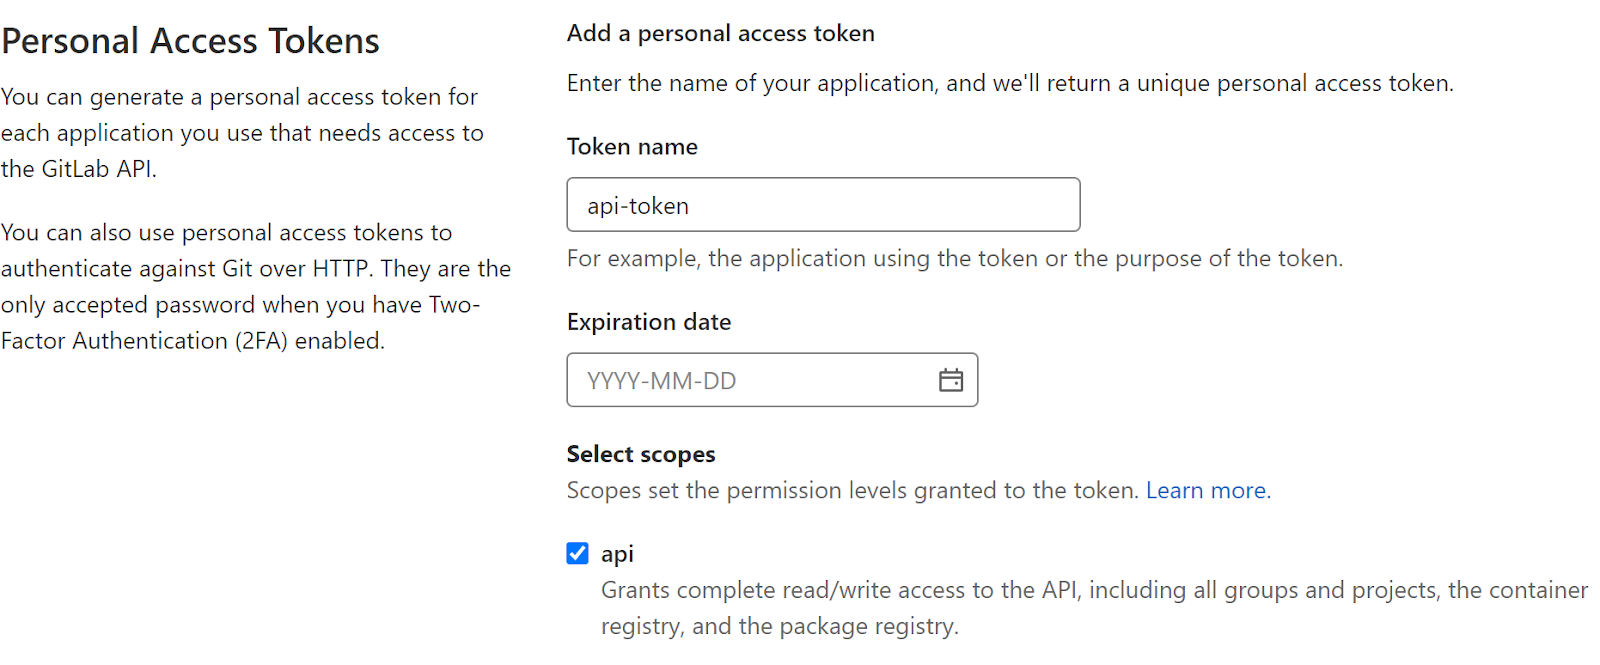 How to generate Personal Access Tokens for your GitLab API